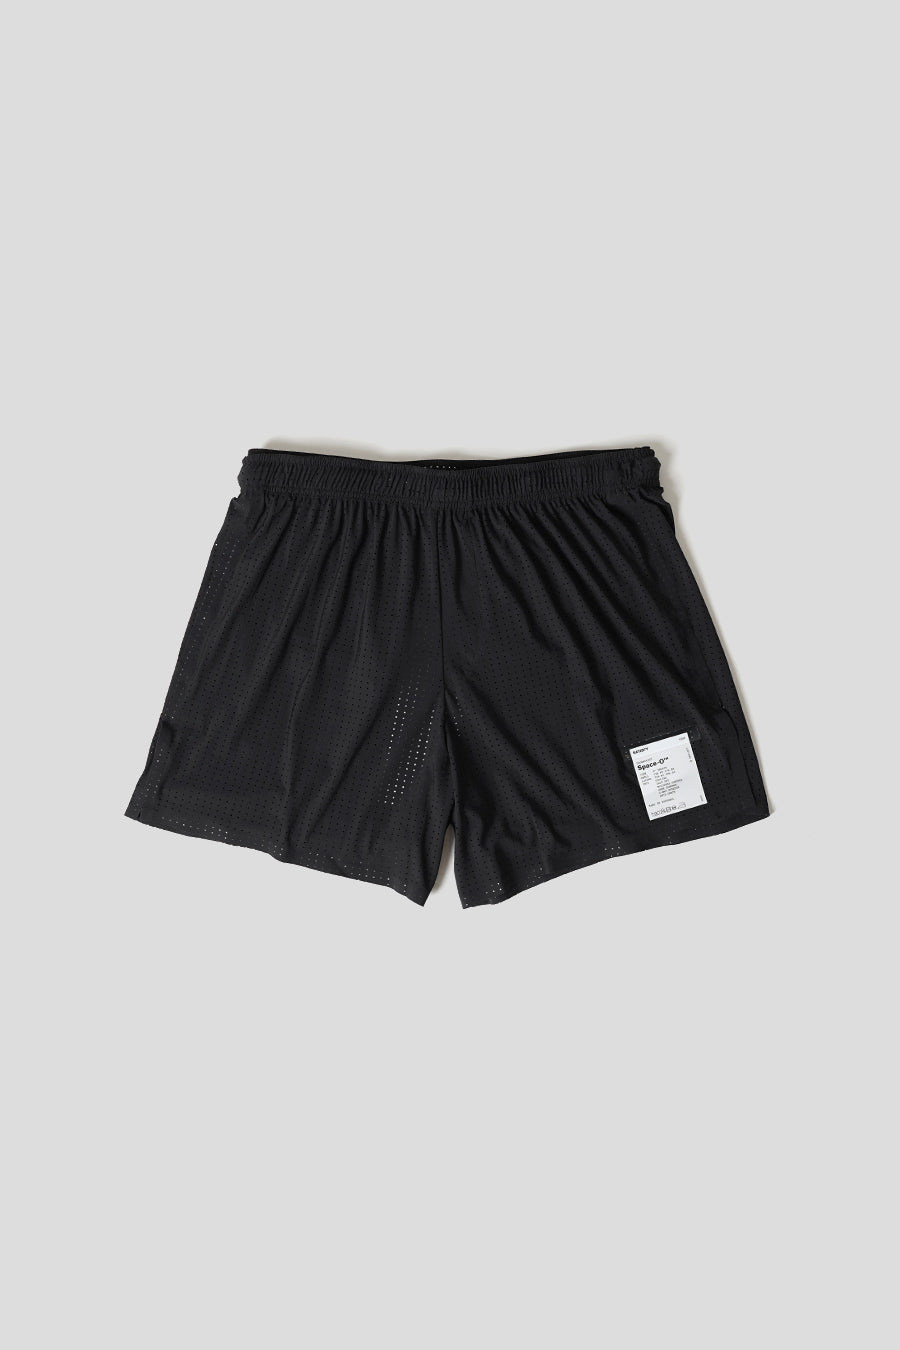 SATISFY - BLACK SPACE-O 5 SHORTS - LE LABO STORE